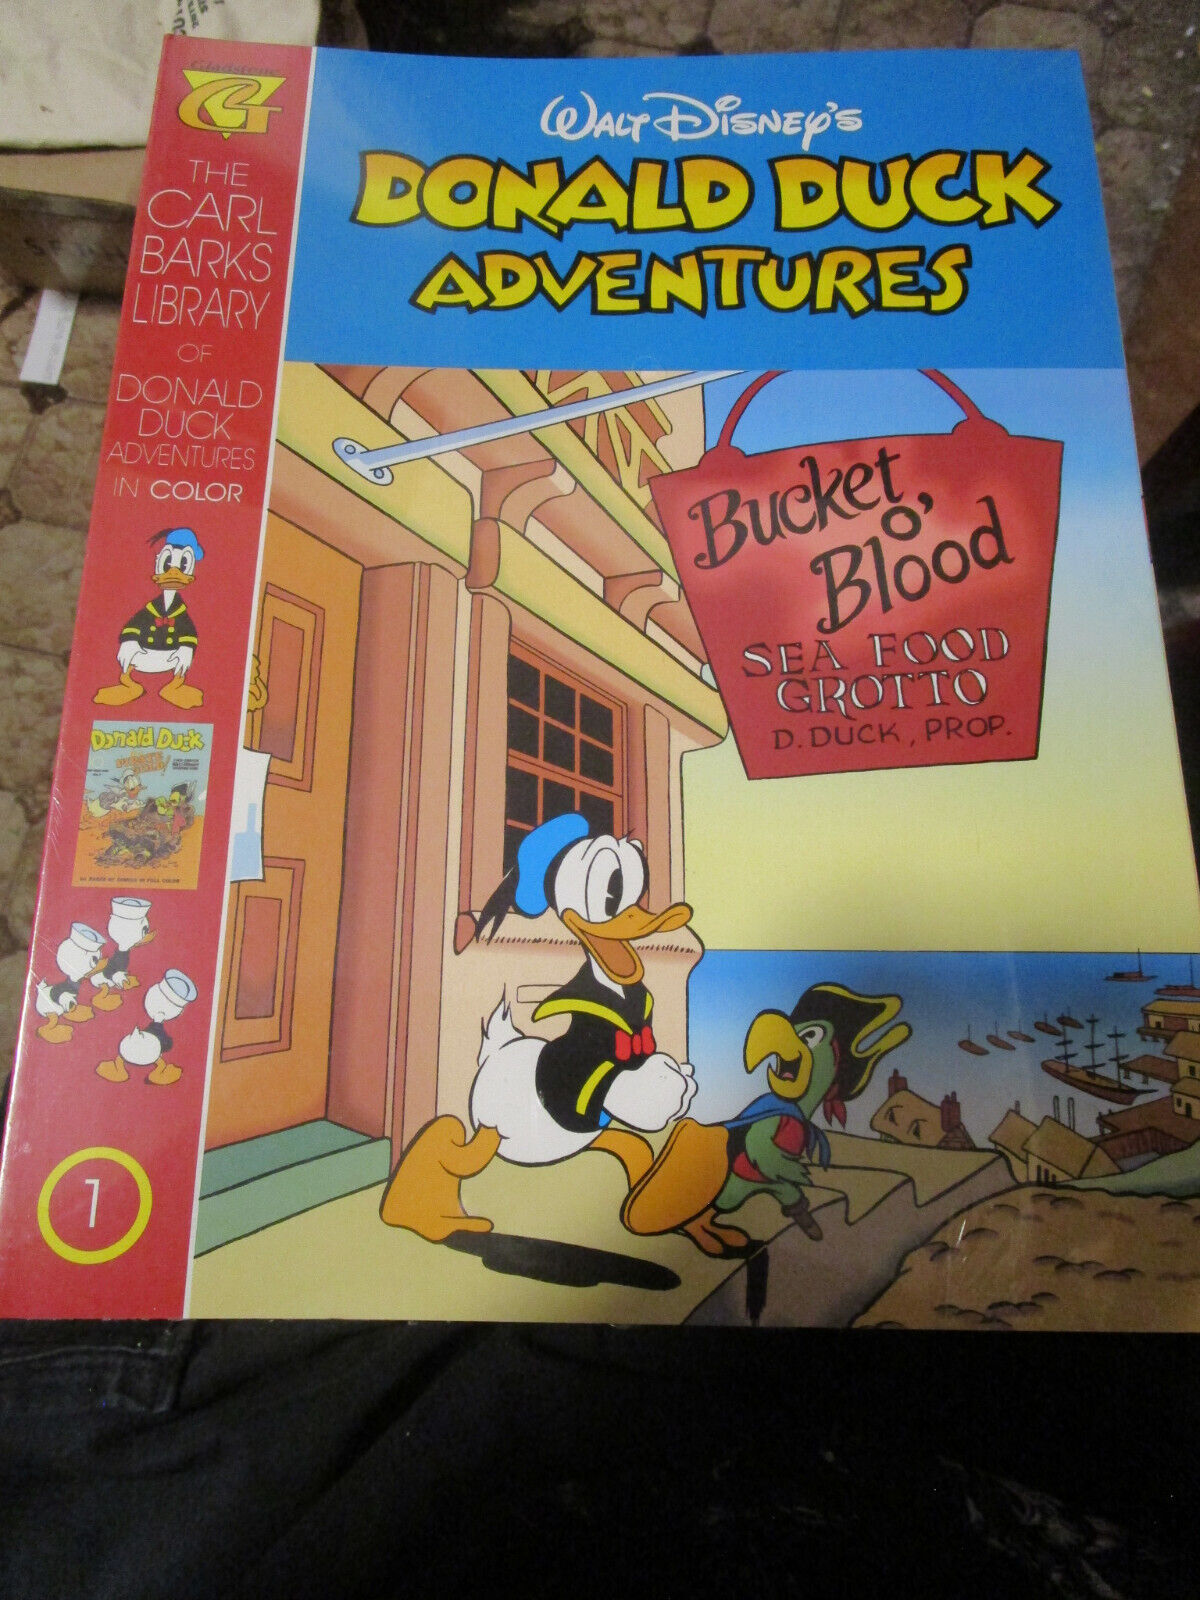 Walt Disney's Donald Duck Adventures Gladstone Carl Barks Library select a title